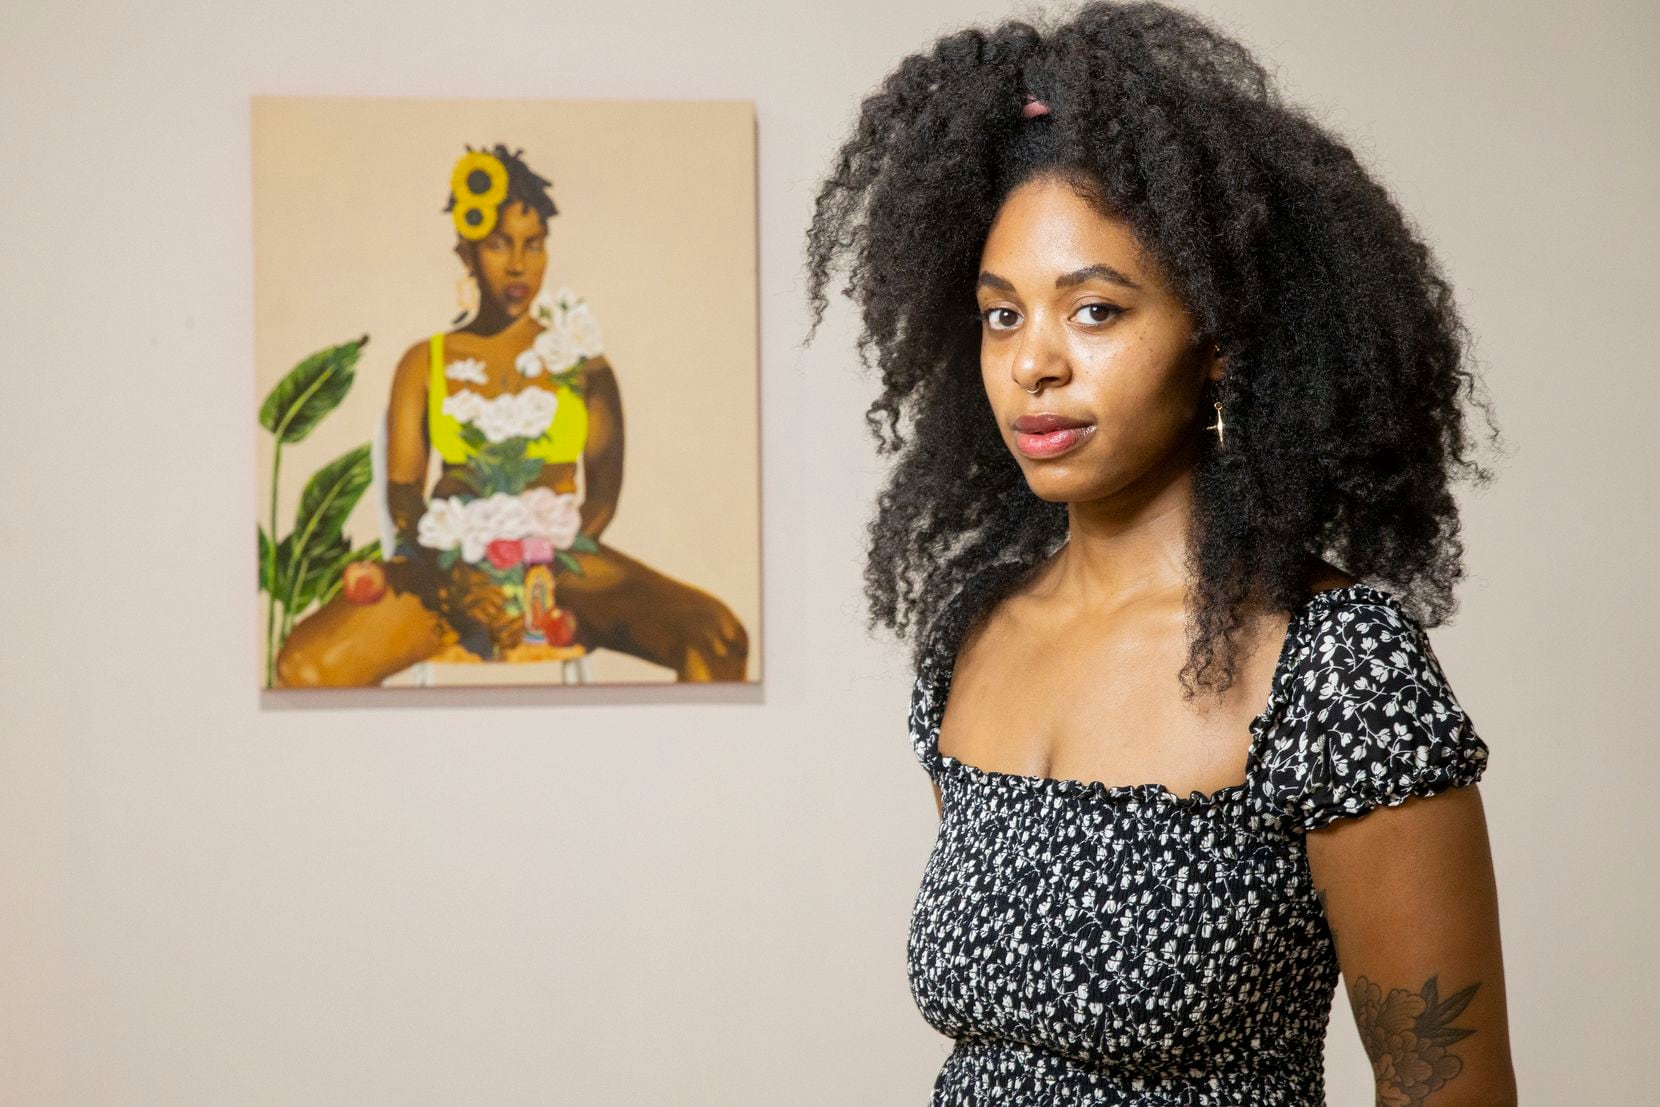 Artist Ari Brielle poses for a photo with her piece 'Altar' which is part of 500x Gallery's 'Vivrant Thang' exhibit curated by Ciara Elle Bryant on Aug. 14, 2020 in Dallas. 